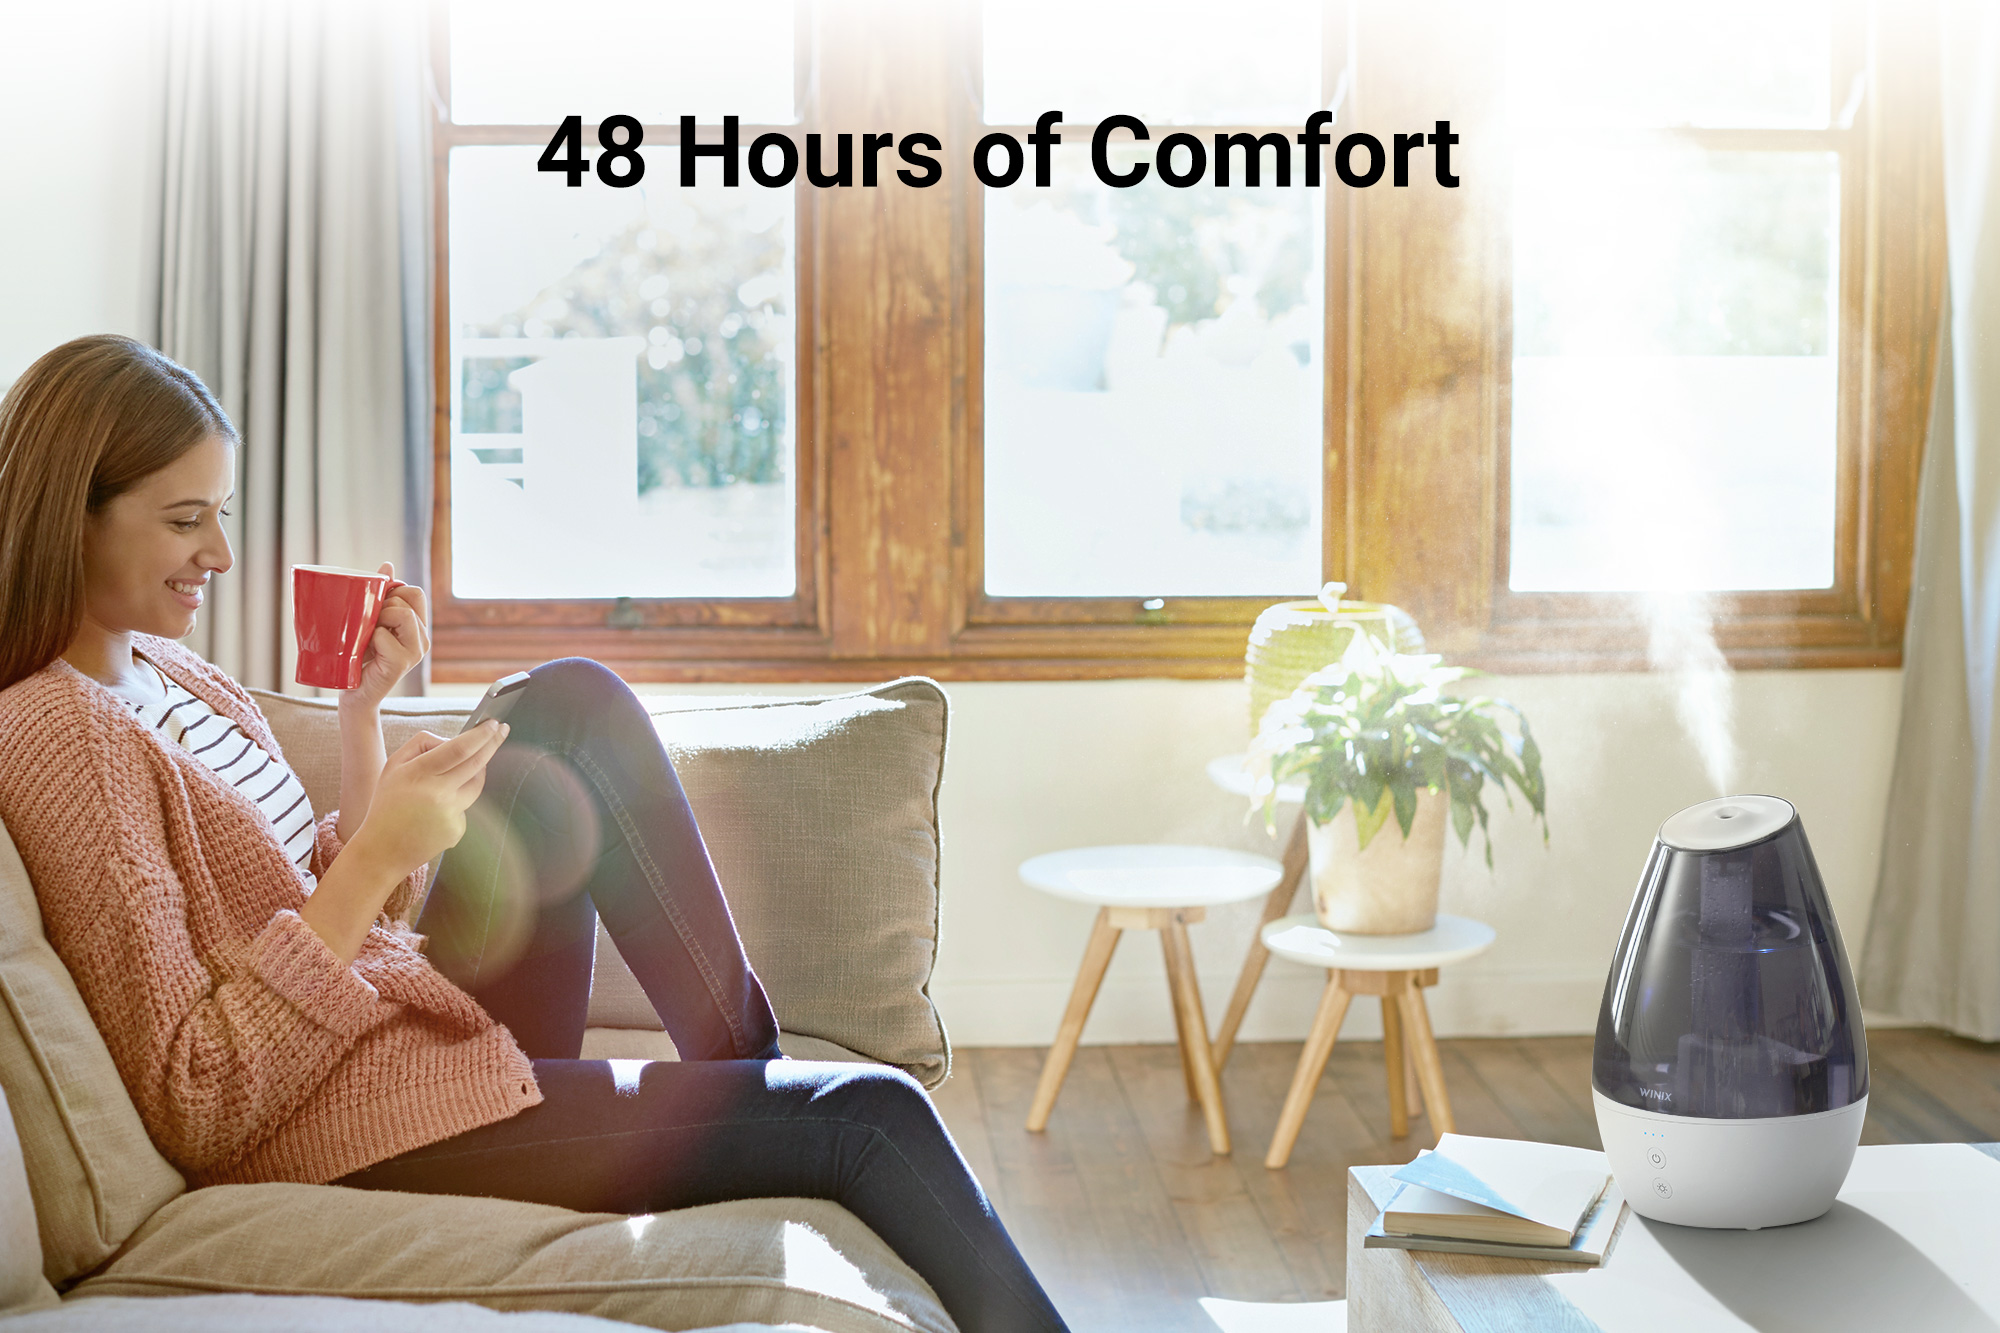 L100 Humidifier on coffee table next to woman sitting on a couch and text saying 48 hours of comfort